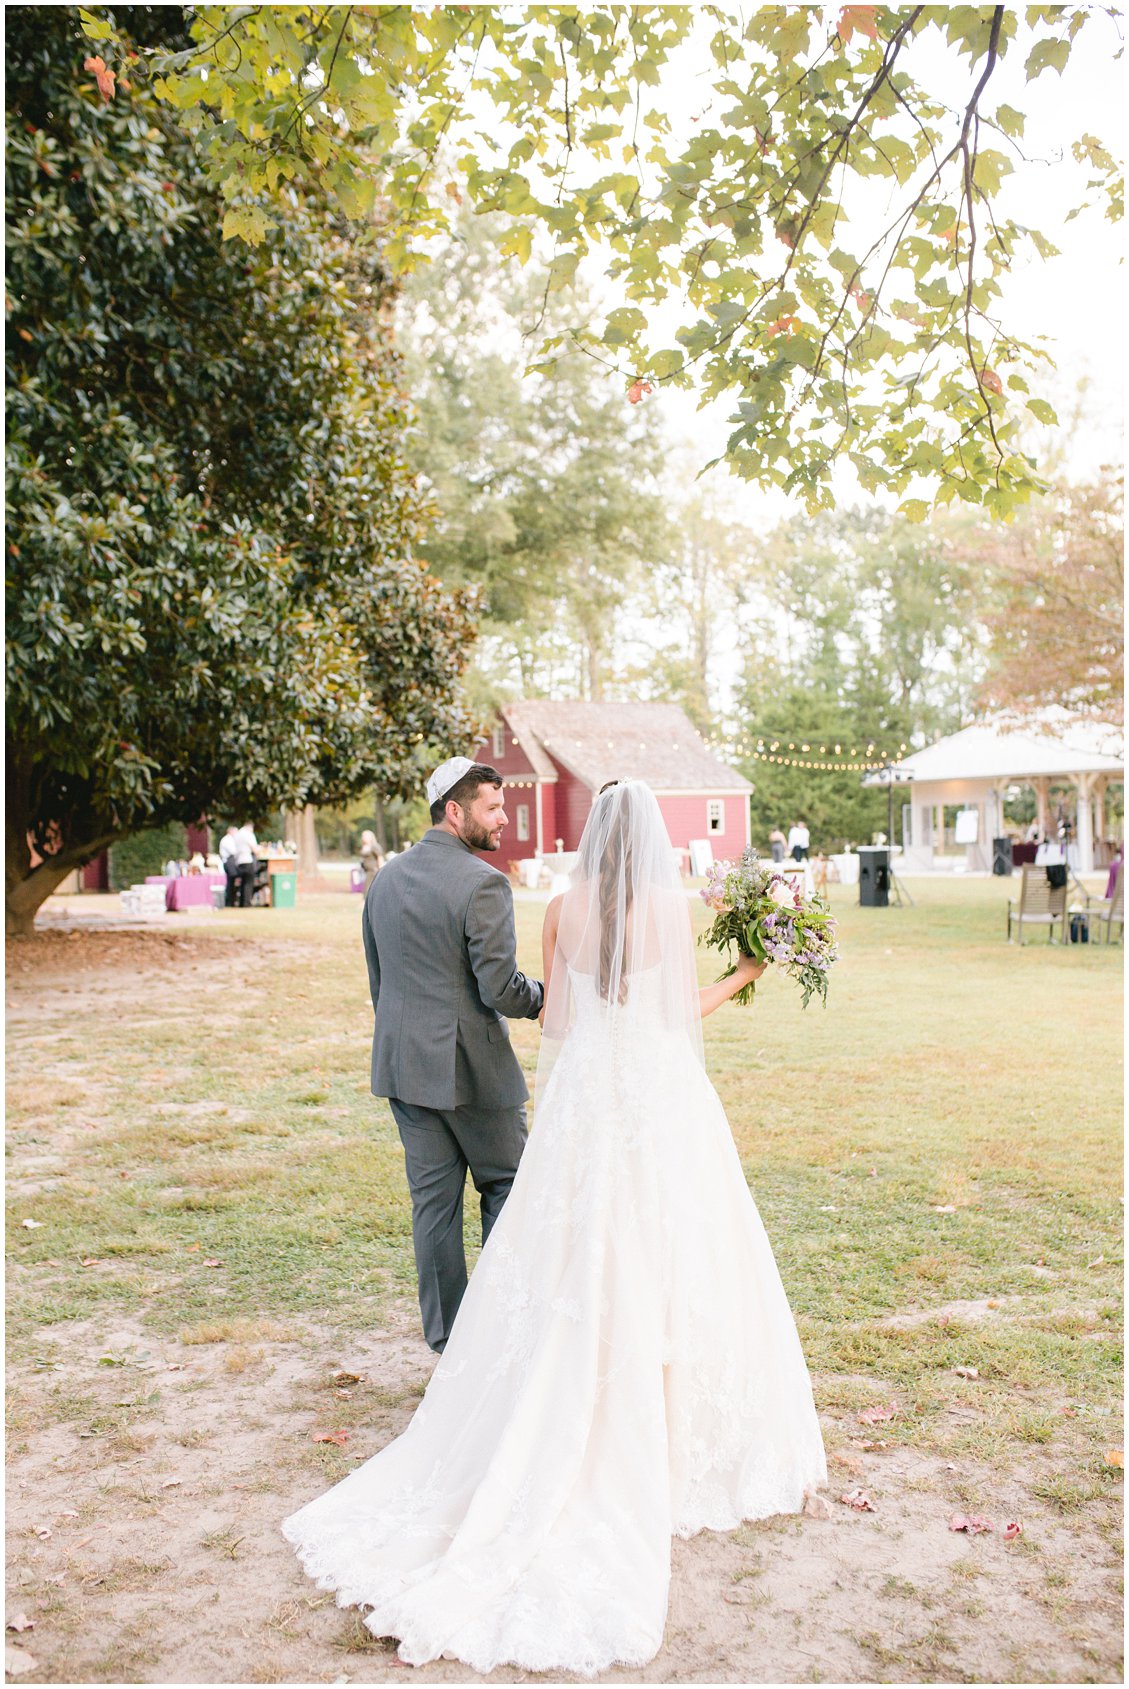 Intimate outdoor wedding at Seven Springs Farm & Manor by Tara & Stephen of Pattengale Photography